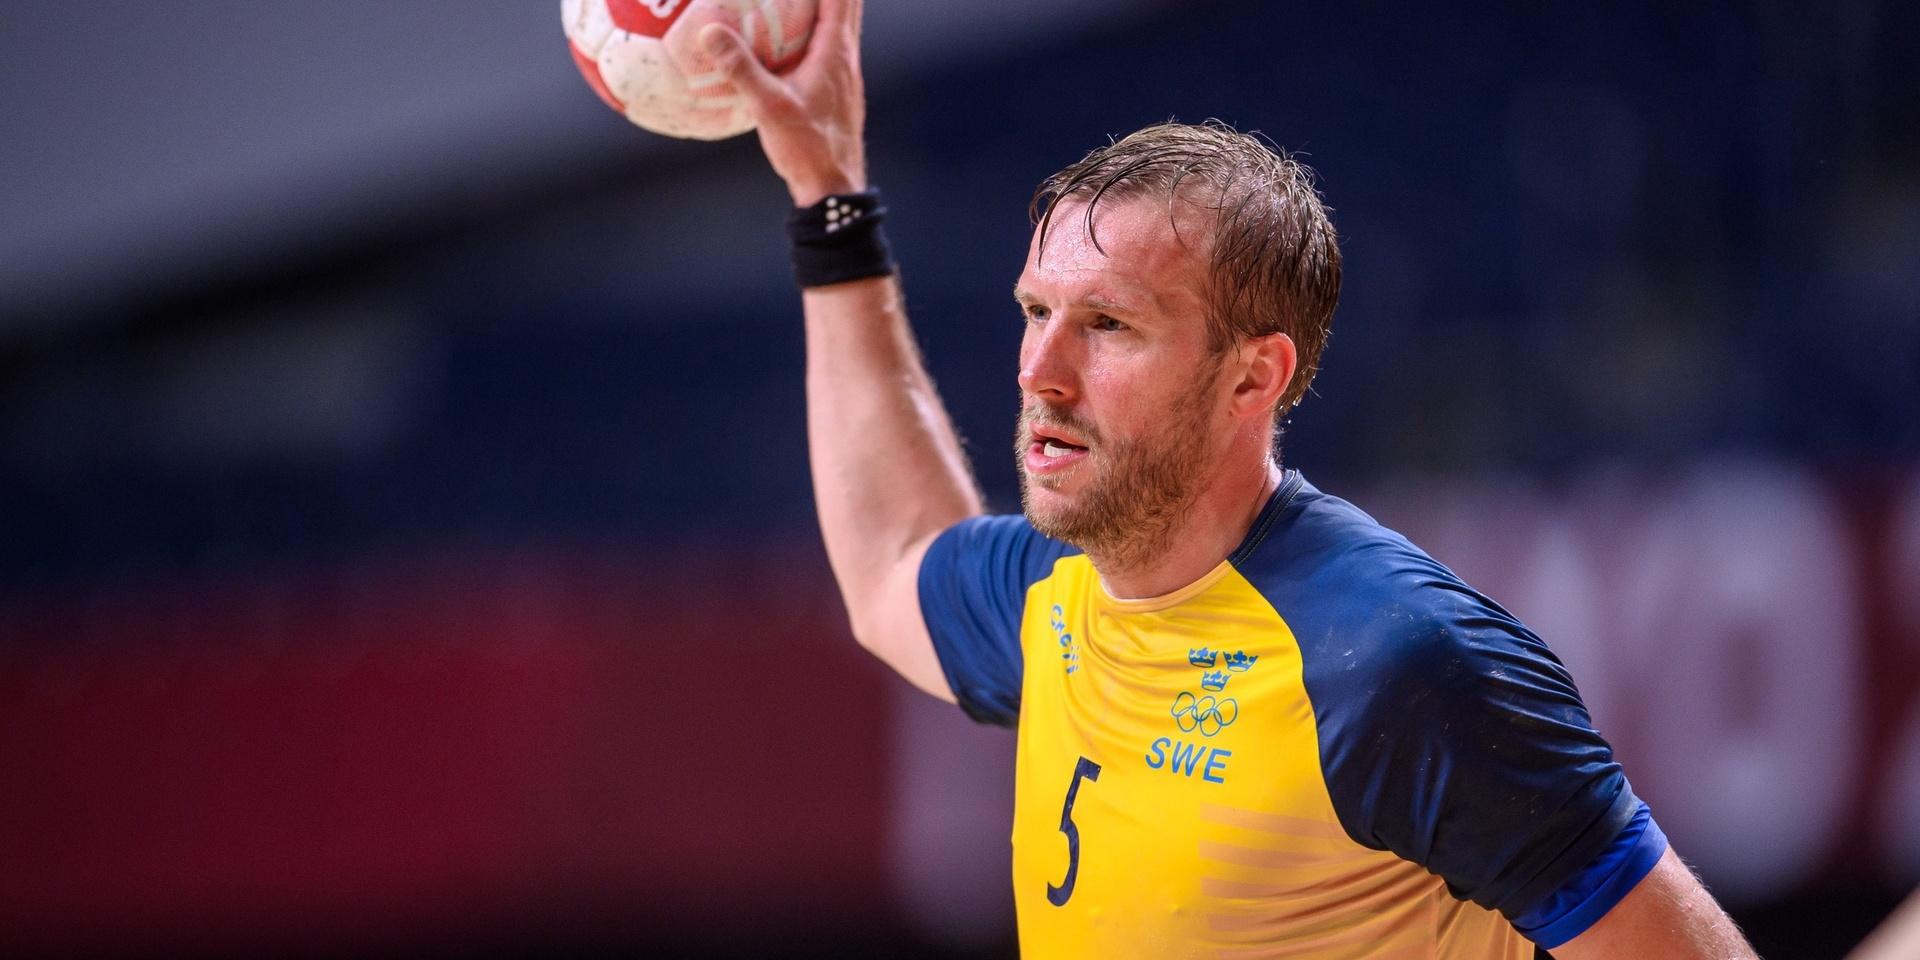 210726 Max Darj of Sweden competes in the men´s handball match between Japan and Sweden during day 3 of the Tokyo 2020 Olympic Games on July 26, 2021 in Tokyo. Photo: Daniel Stiller / BILDBYRÅN / kod DS / DS0174